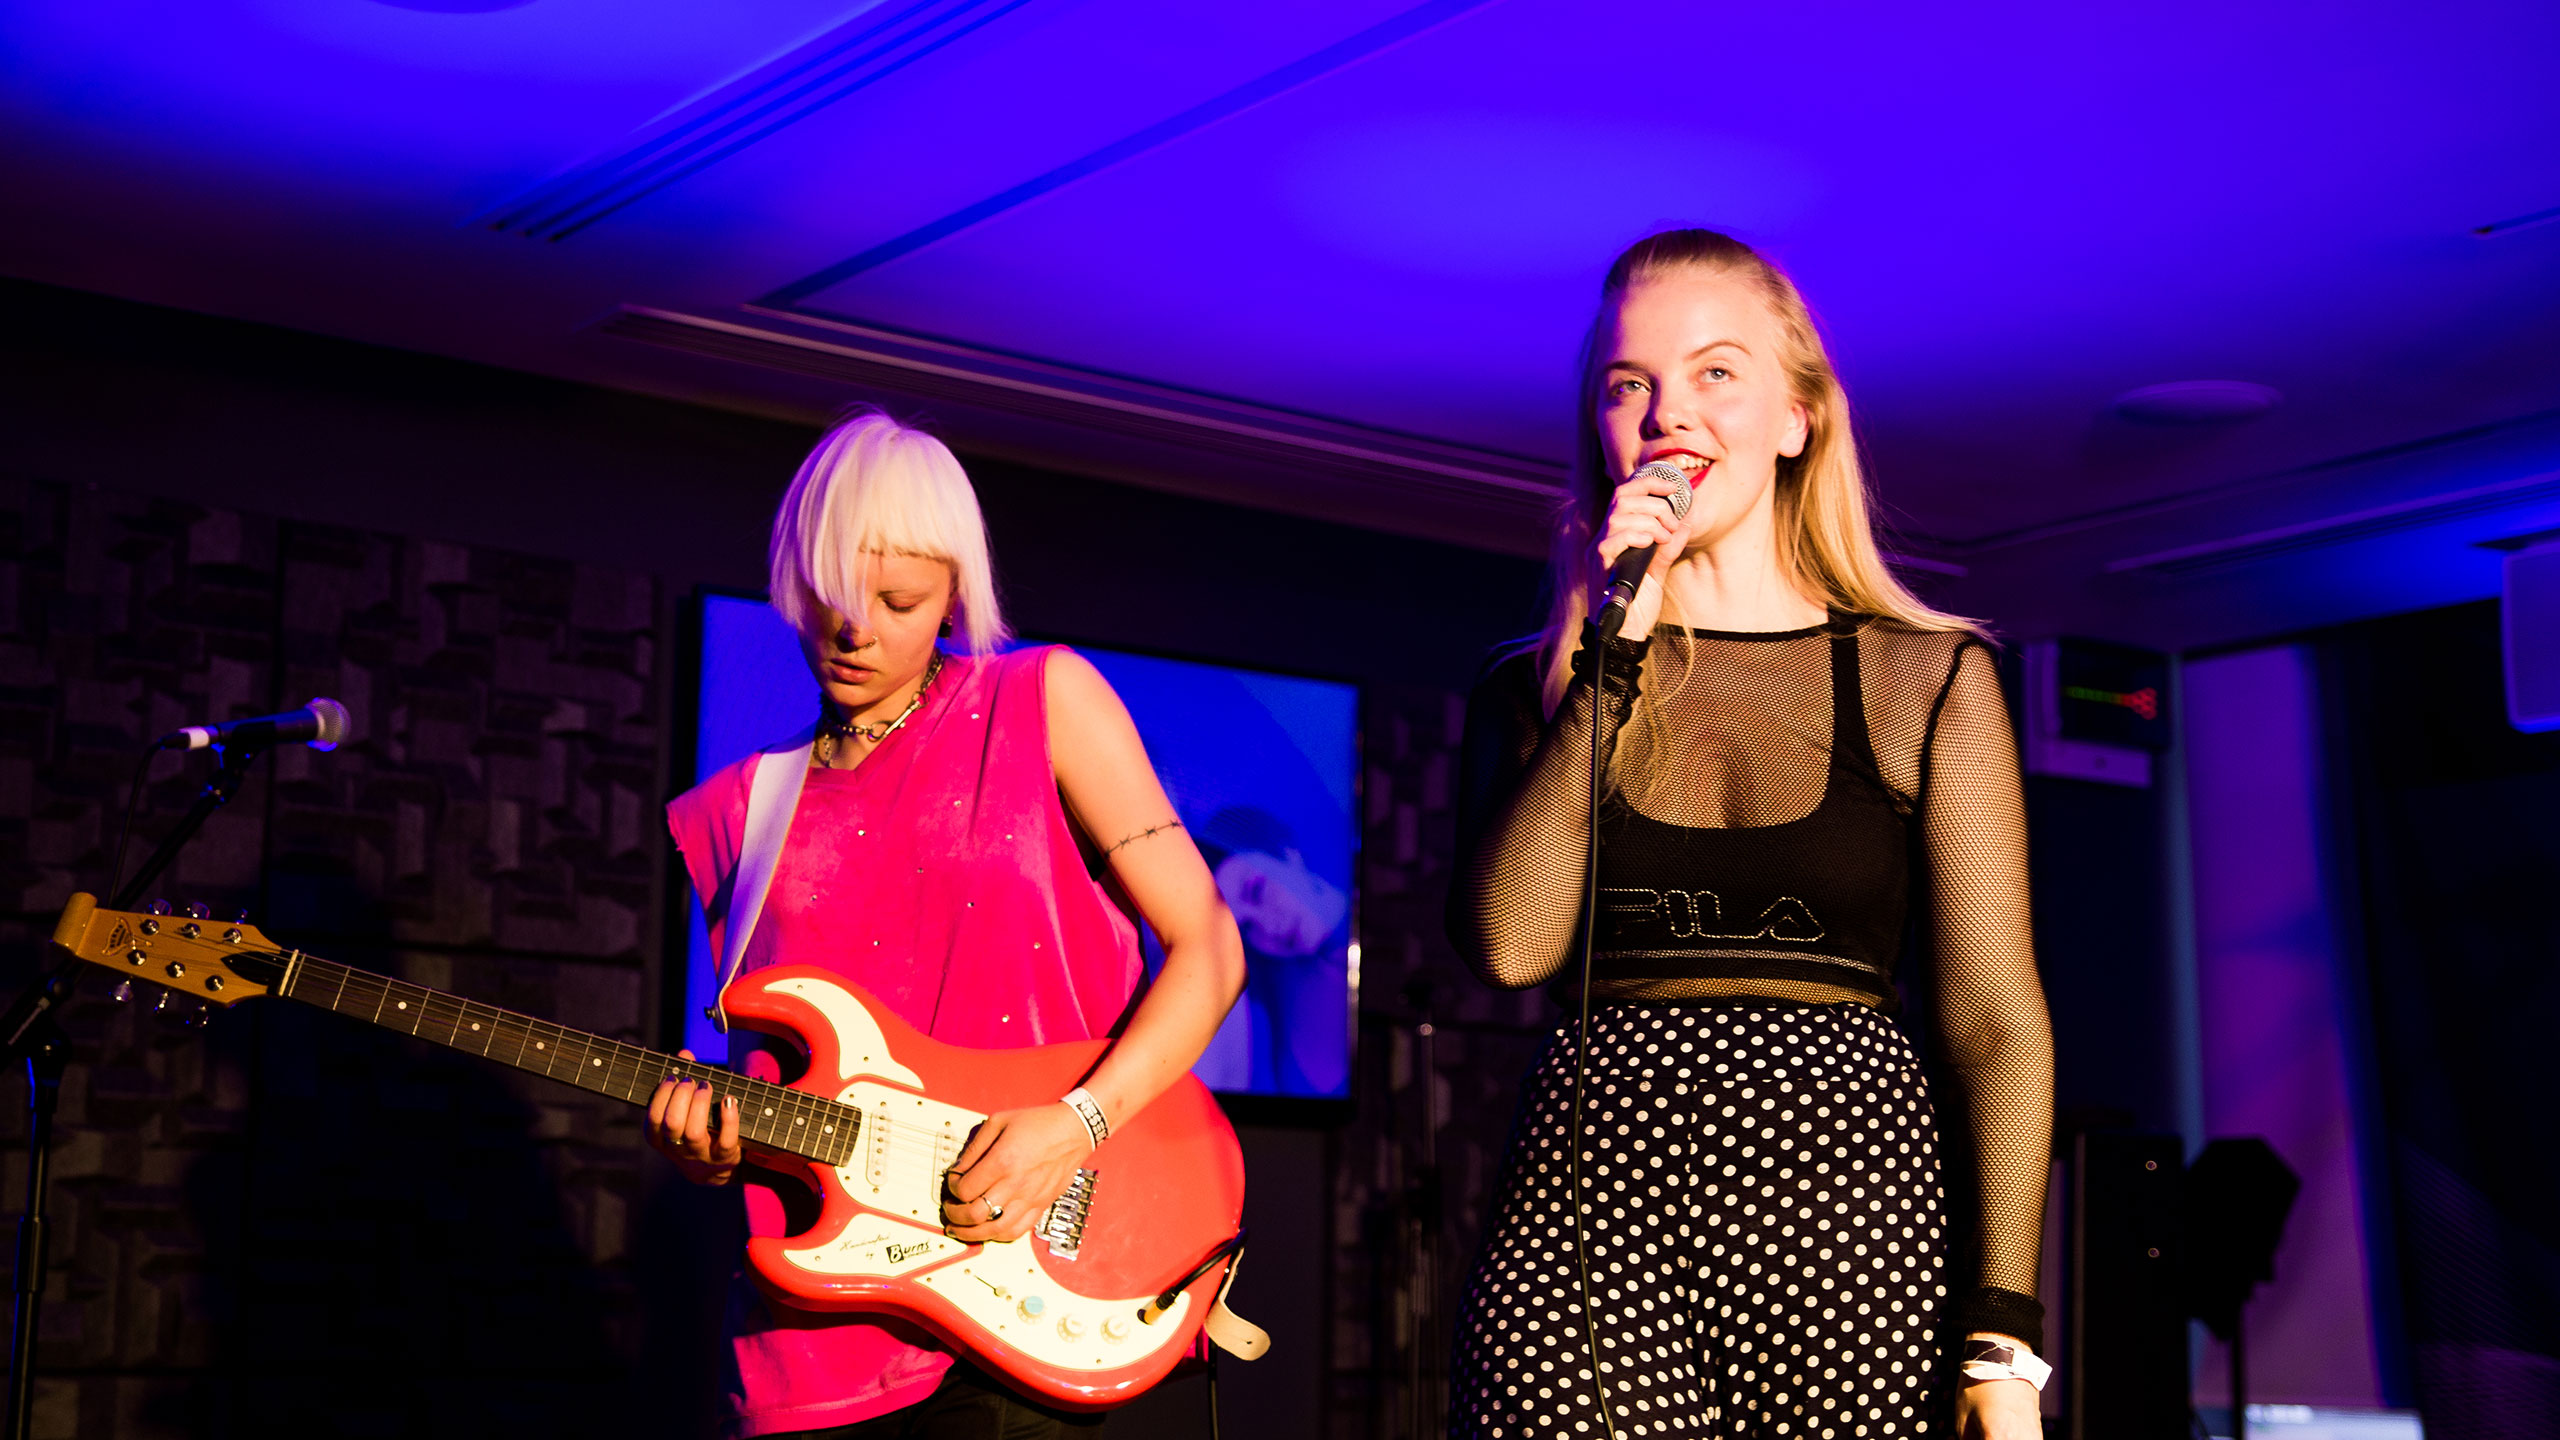 Dream Wife's Rakel Mjoll, wearing a black outfit, sings and Alice Go, wearing a bright pink top, plays guitar on stage at PRS for music Presents